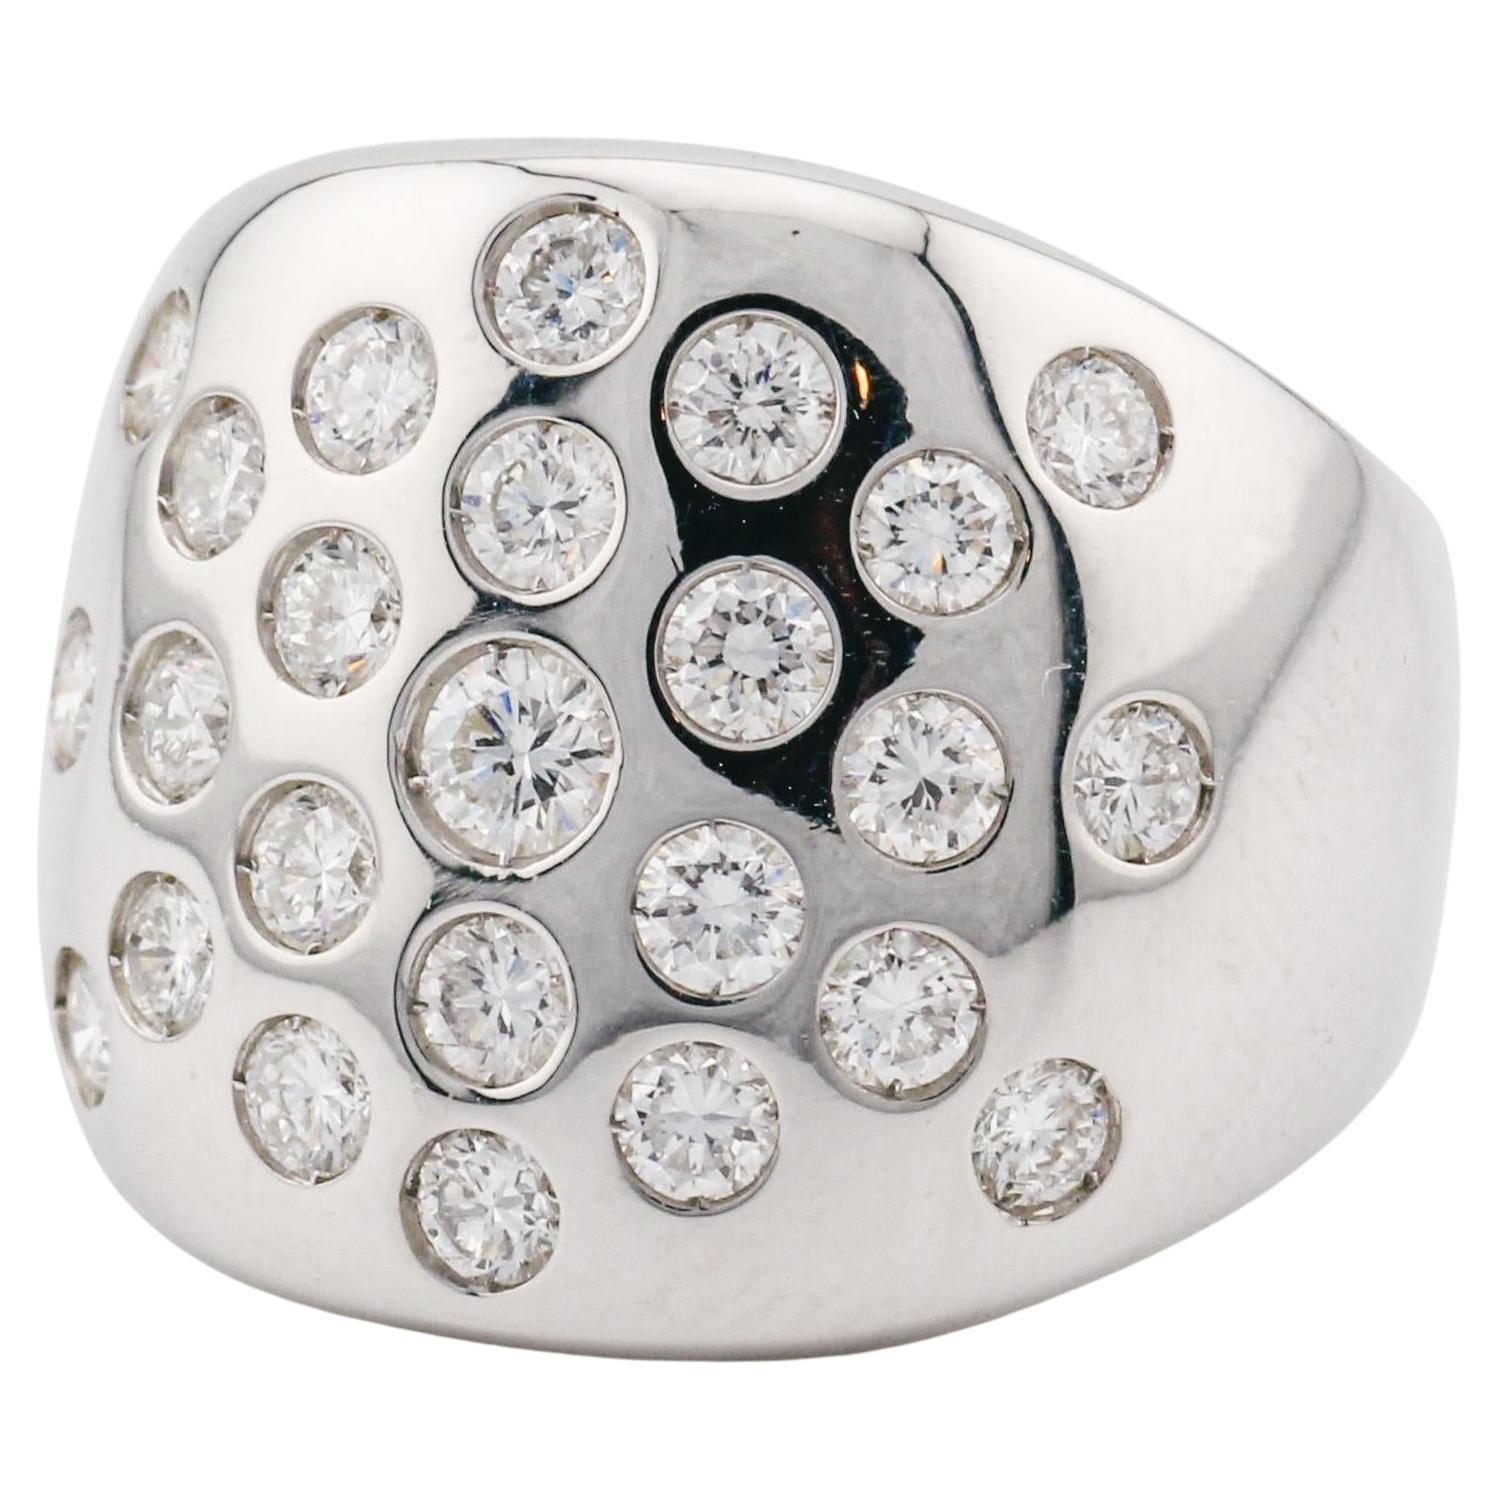 Hermes 1.45 Carat Diamond 18K White Gold Dome Ring Size 6 For Sale